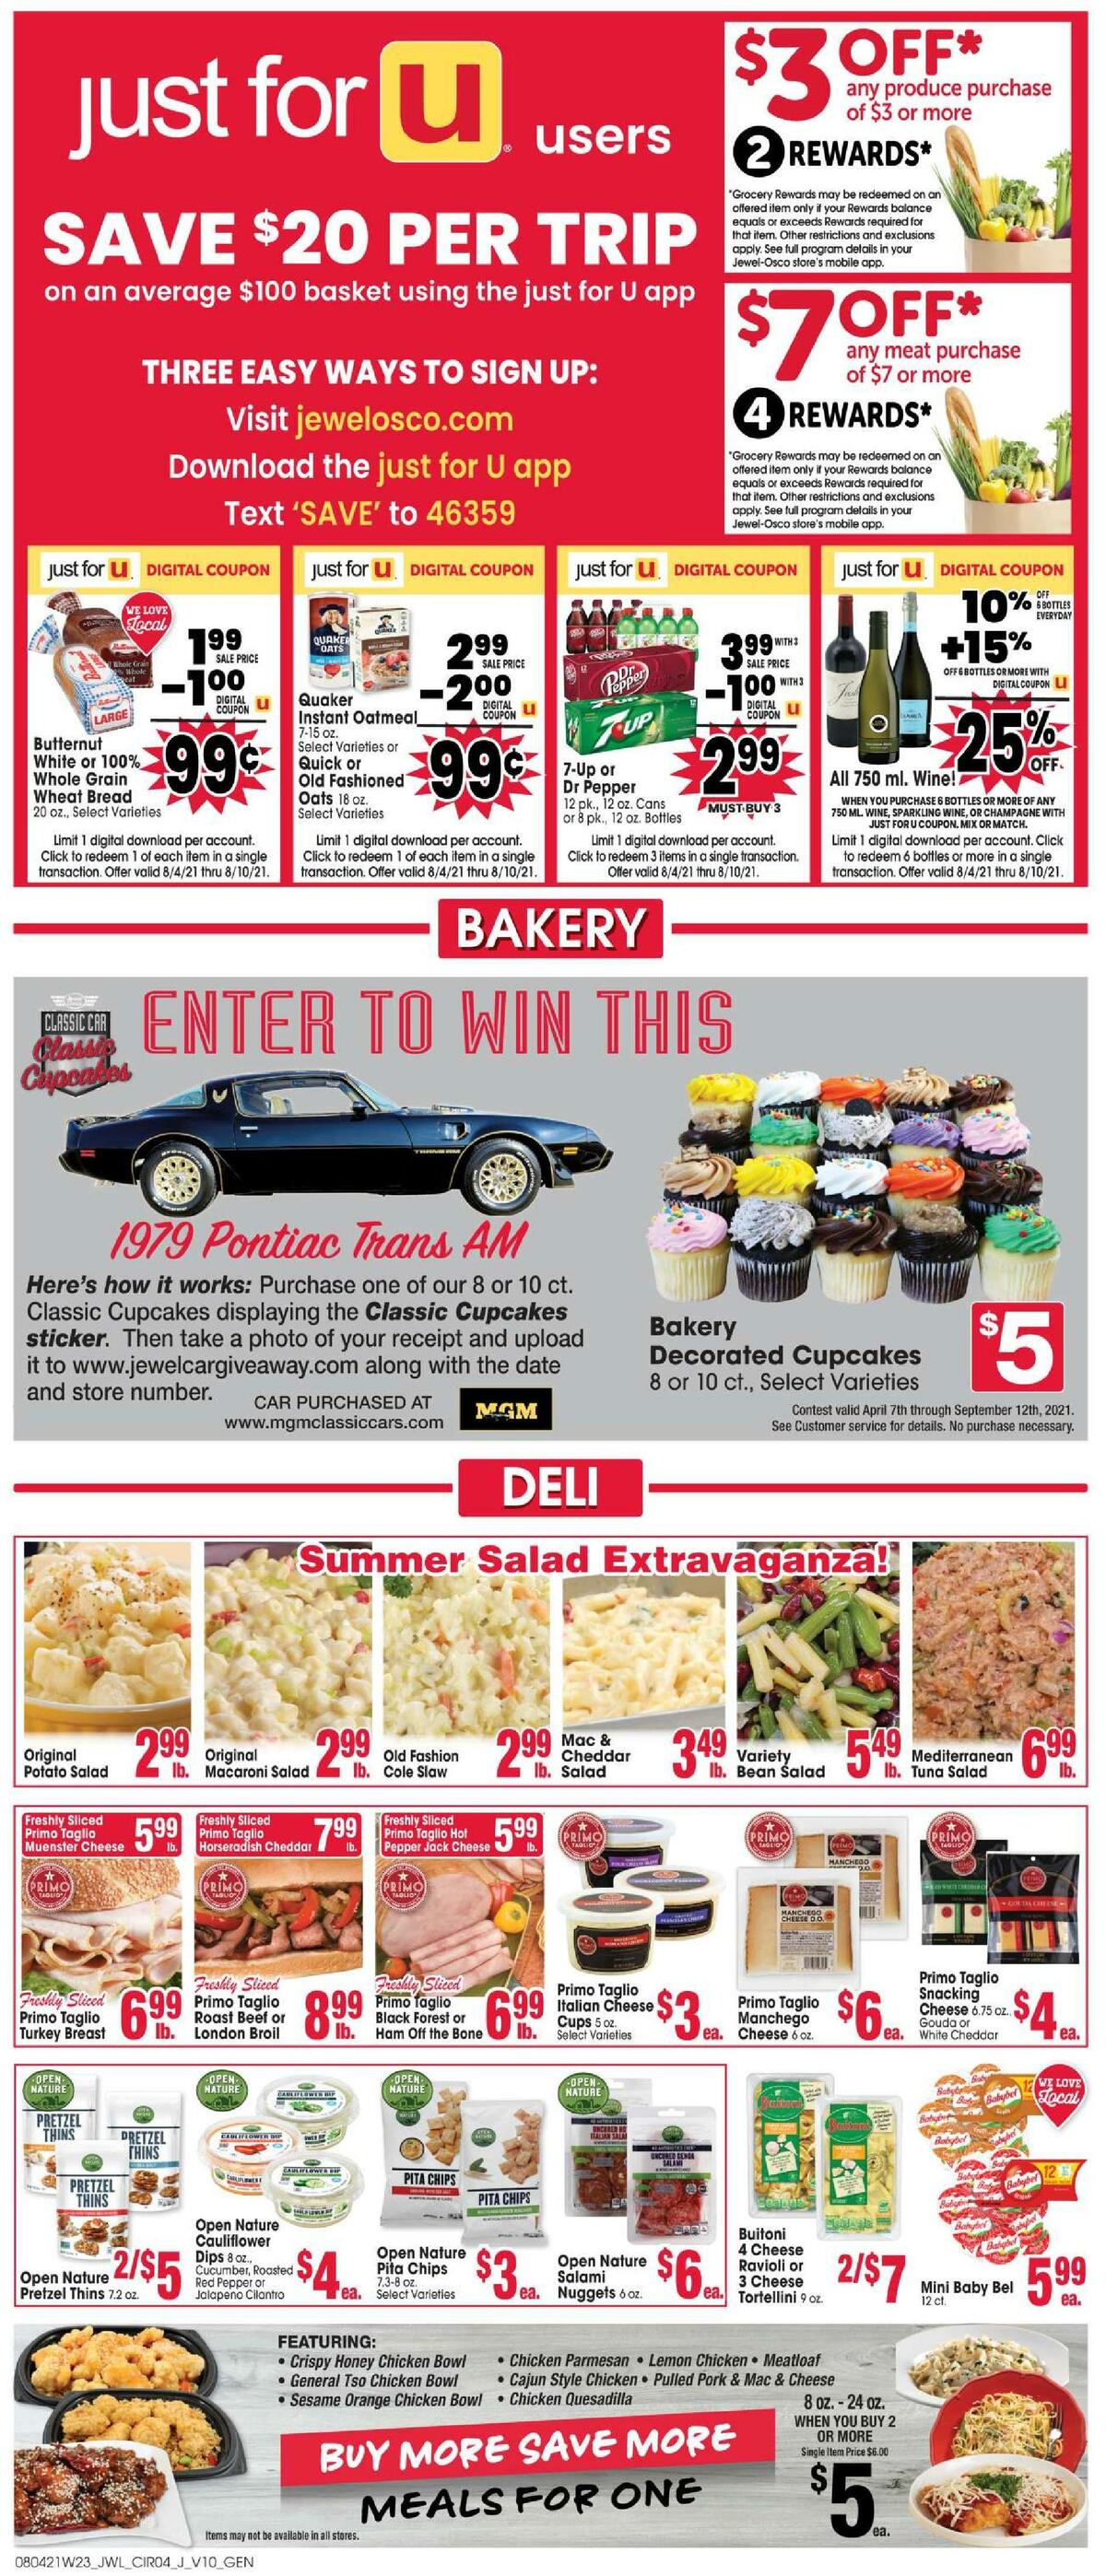 Jewel Osco Weekly Ad from August 4